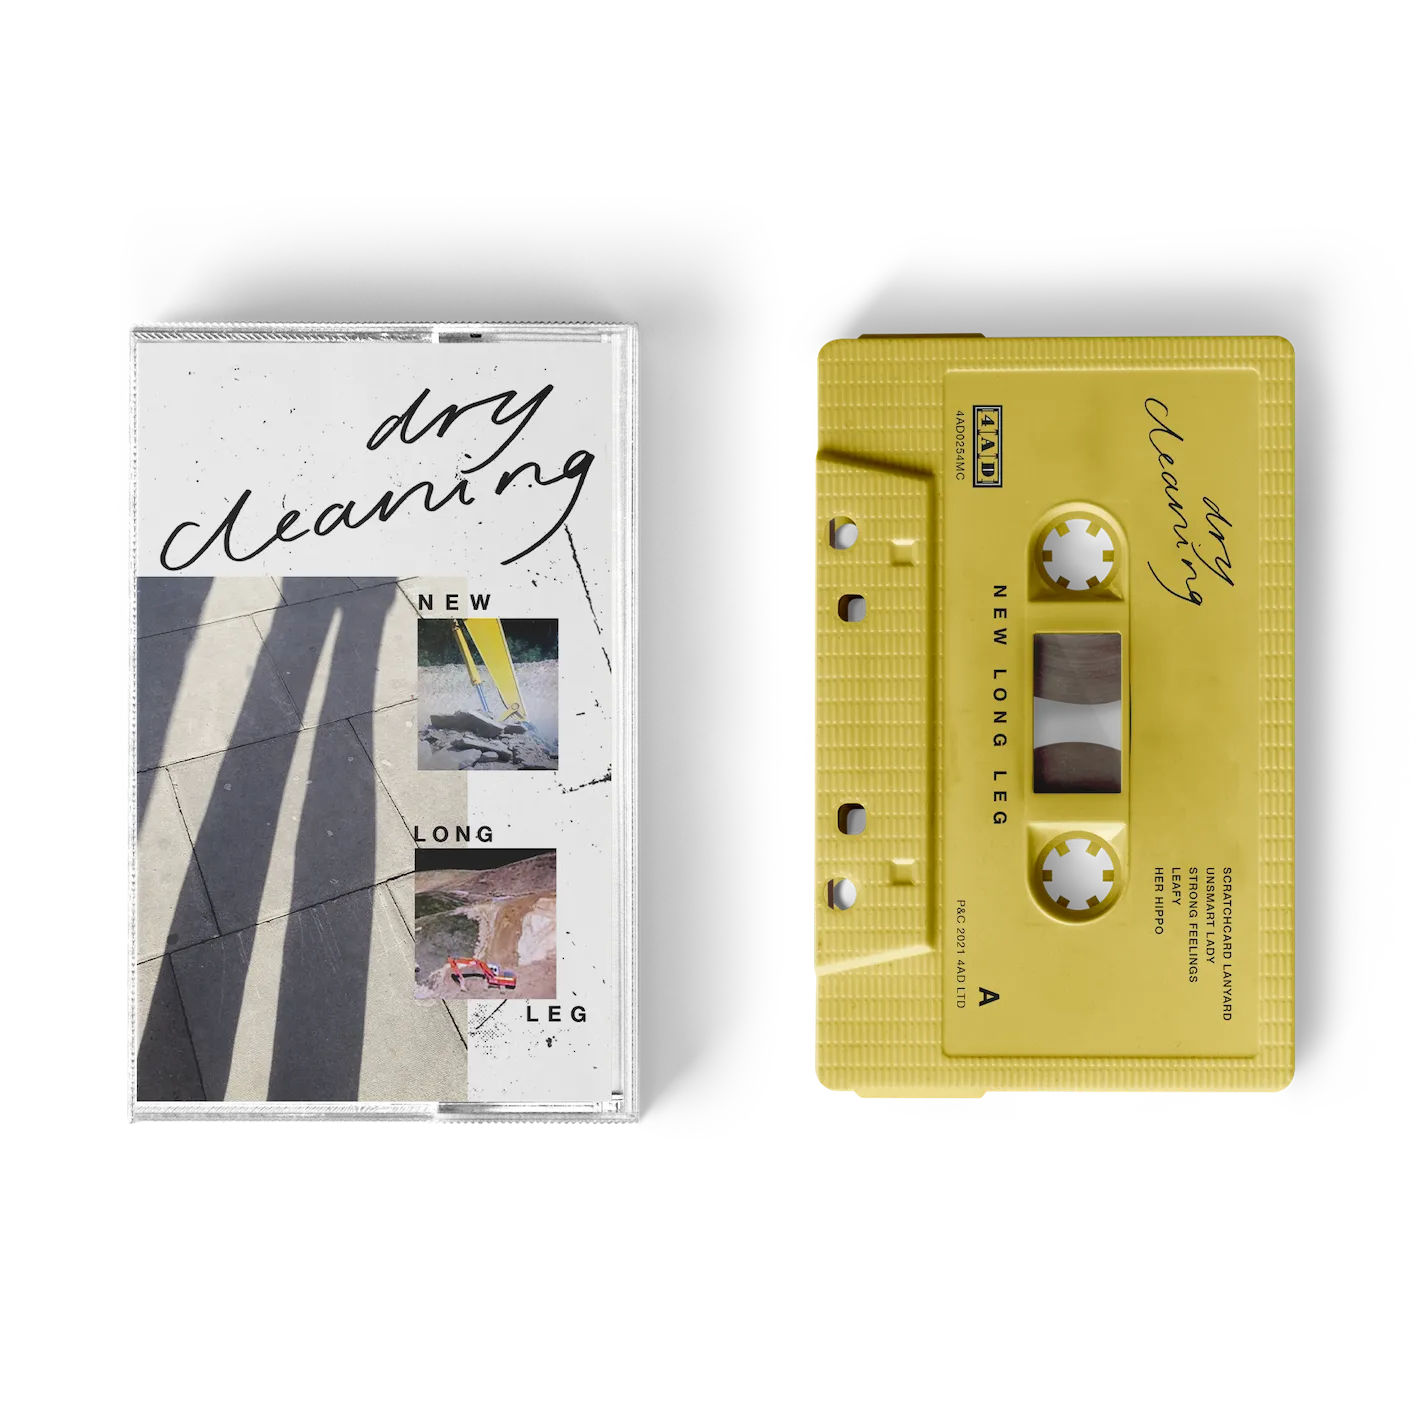 Album artwork for New Long Leg by Dry Cleaning